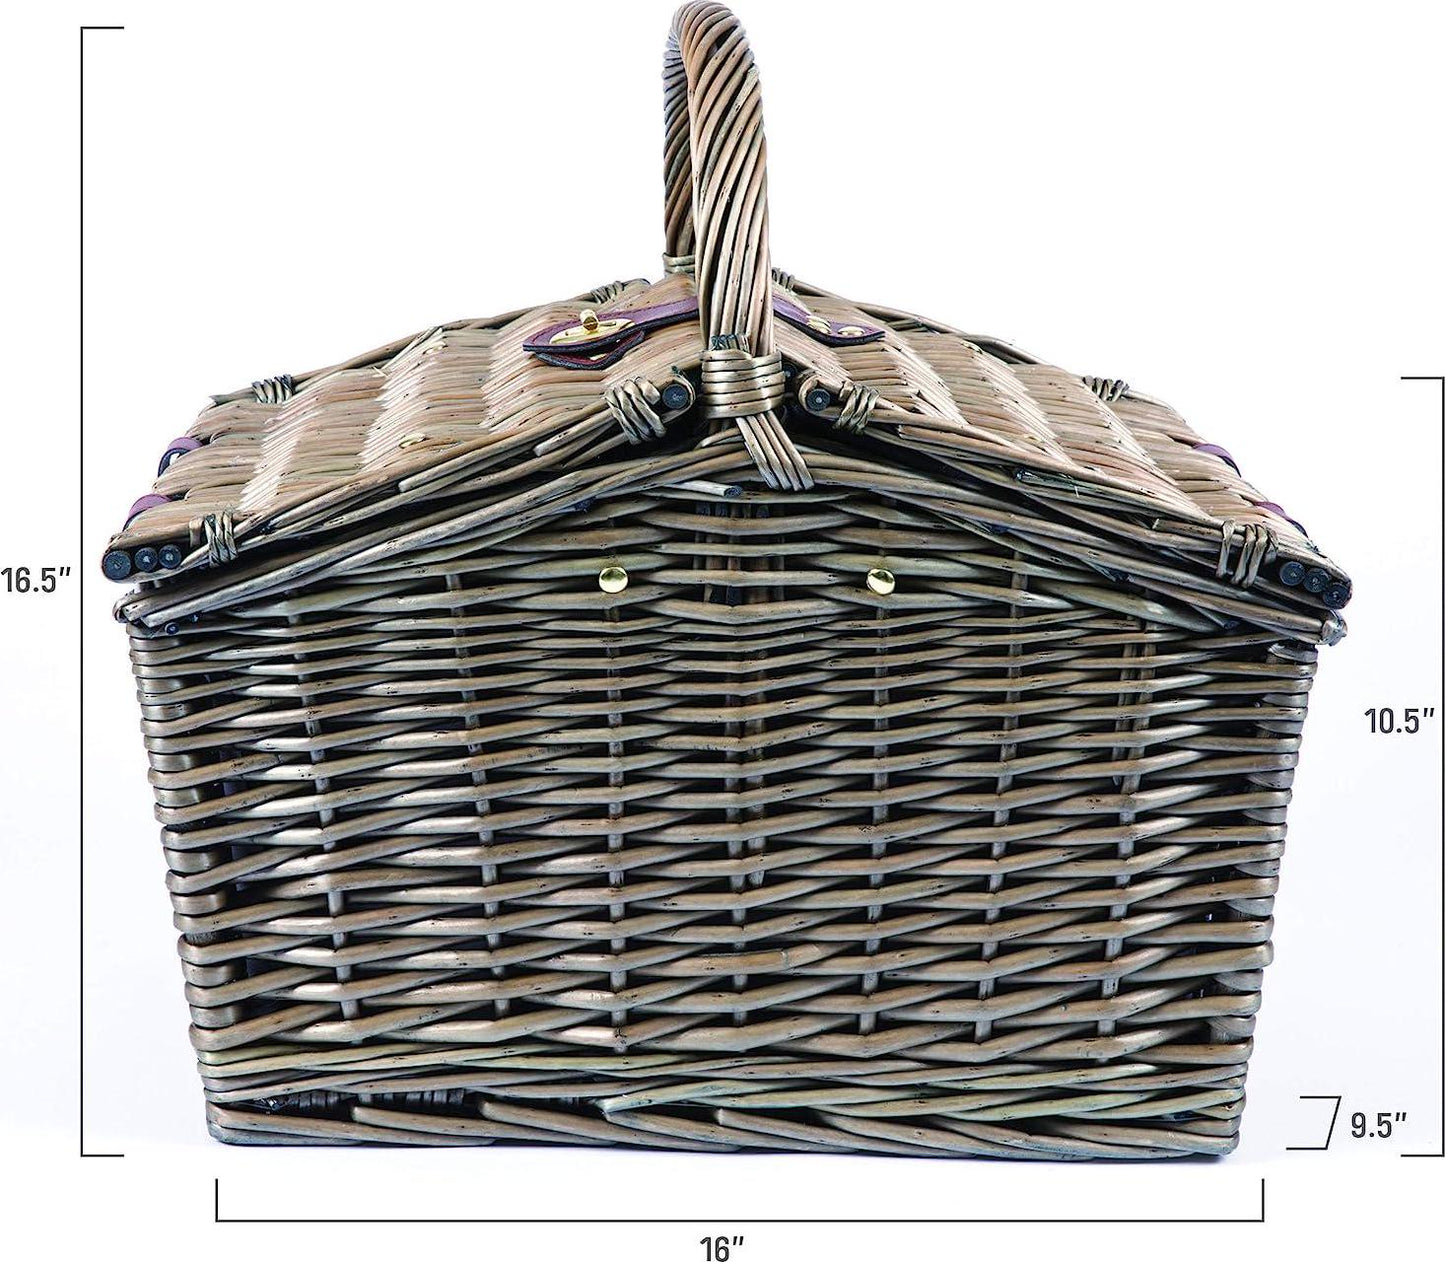 PICNIC TIME Piccadilly Picnic Basket - Romantic Picnic Basket for 2 with Picnic Set, (Anthology Collection - Gray with Gold Accents)